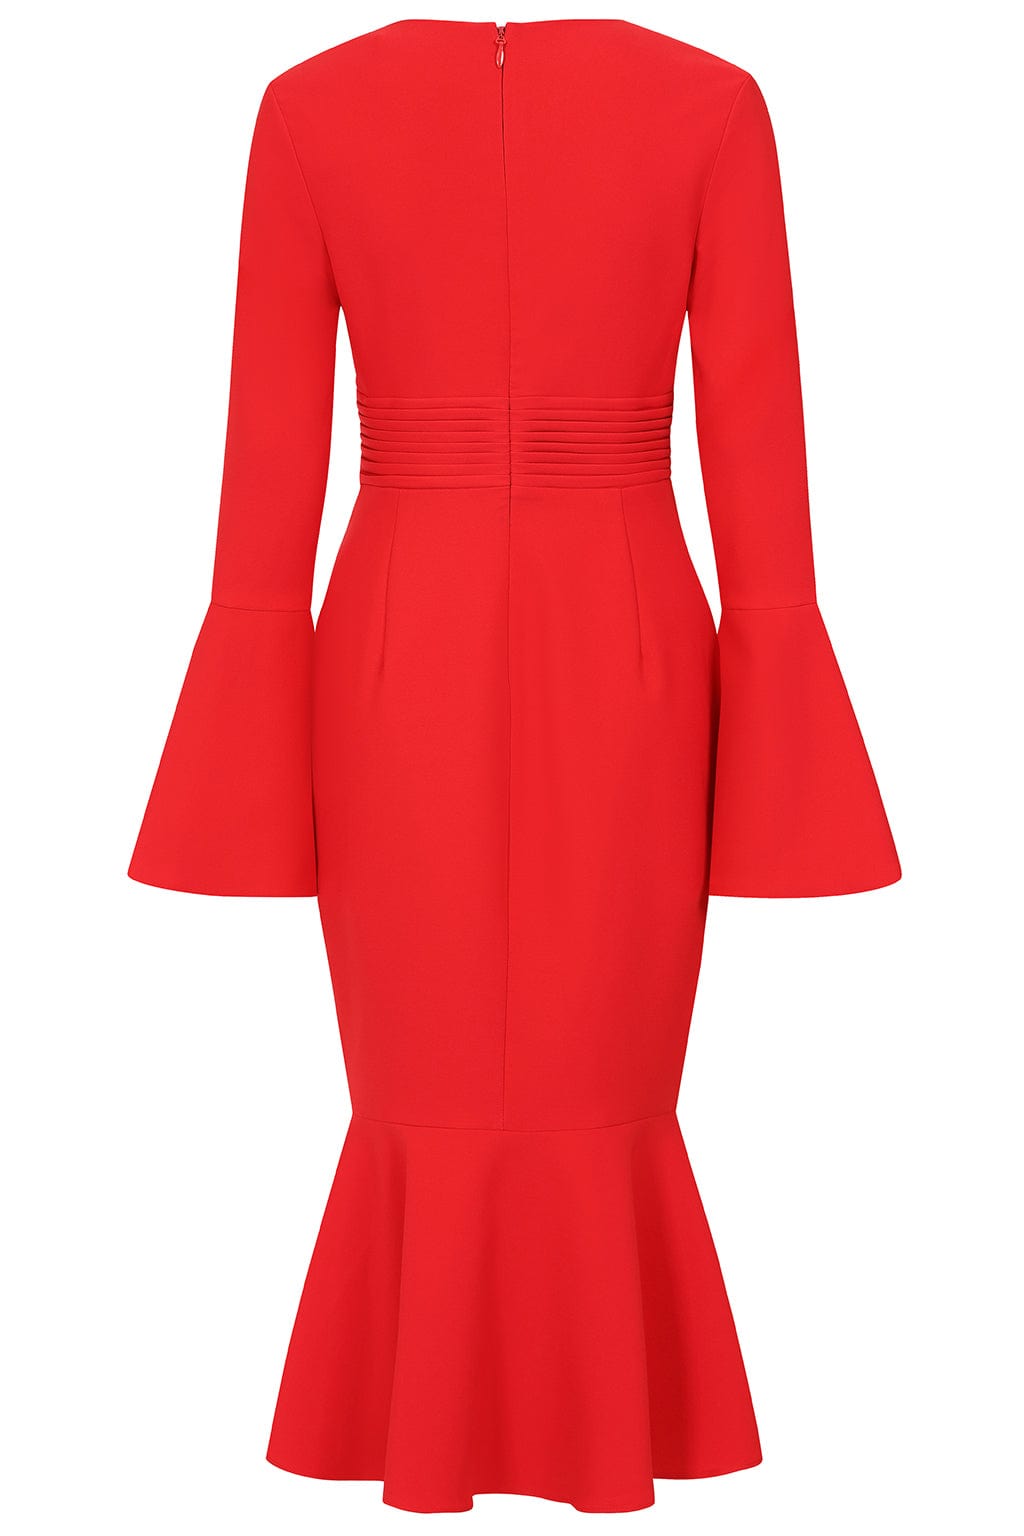 SALMA Fluted Sleeve Rose Button Midi Dress in Red